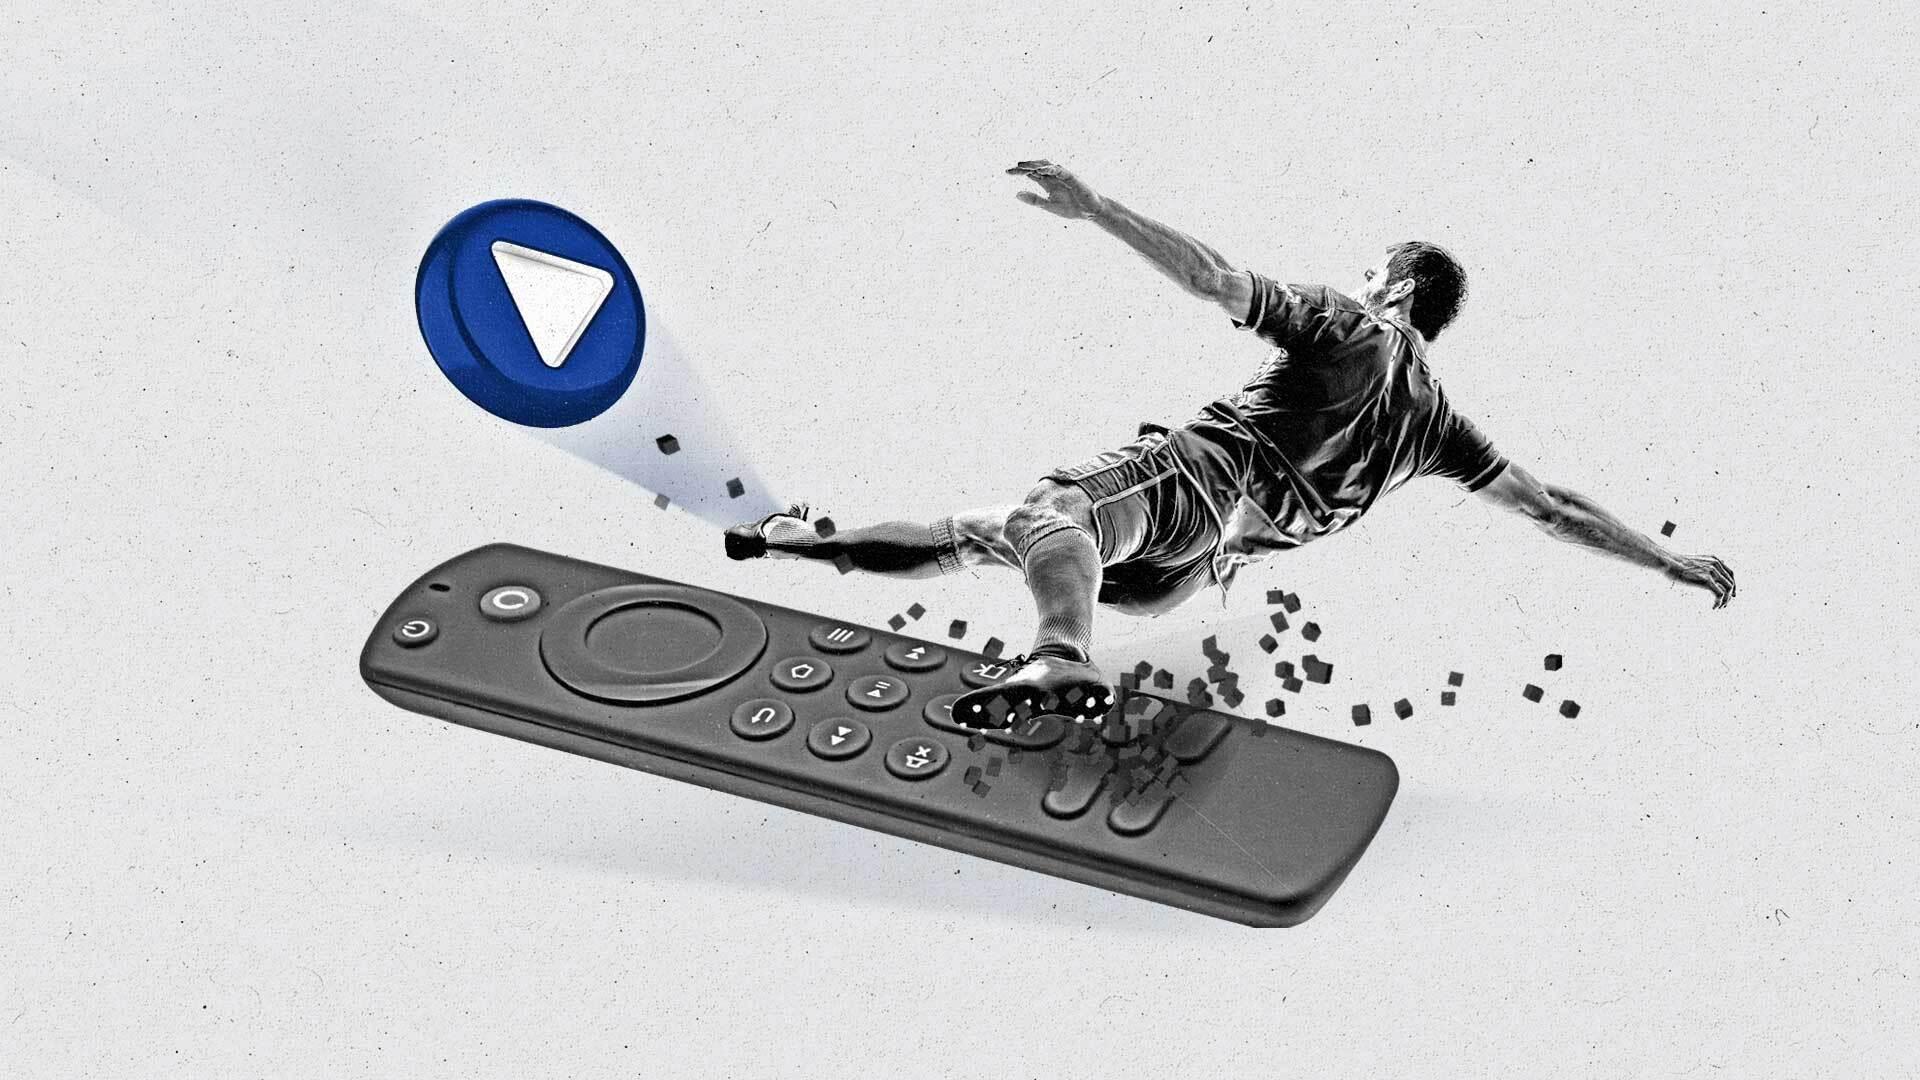 A female soccer player skids on a streaming remote and kicks a play button.